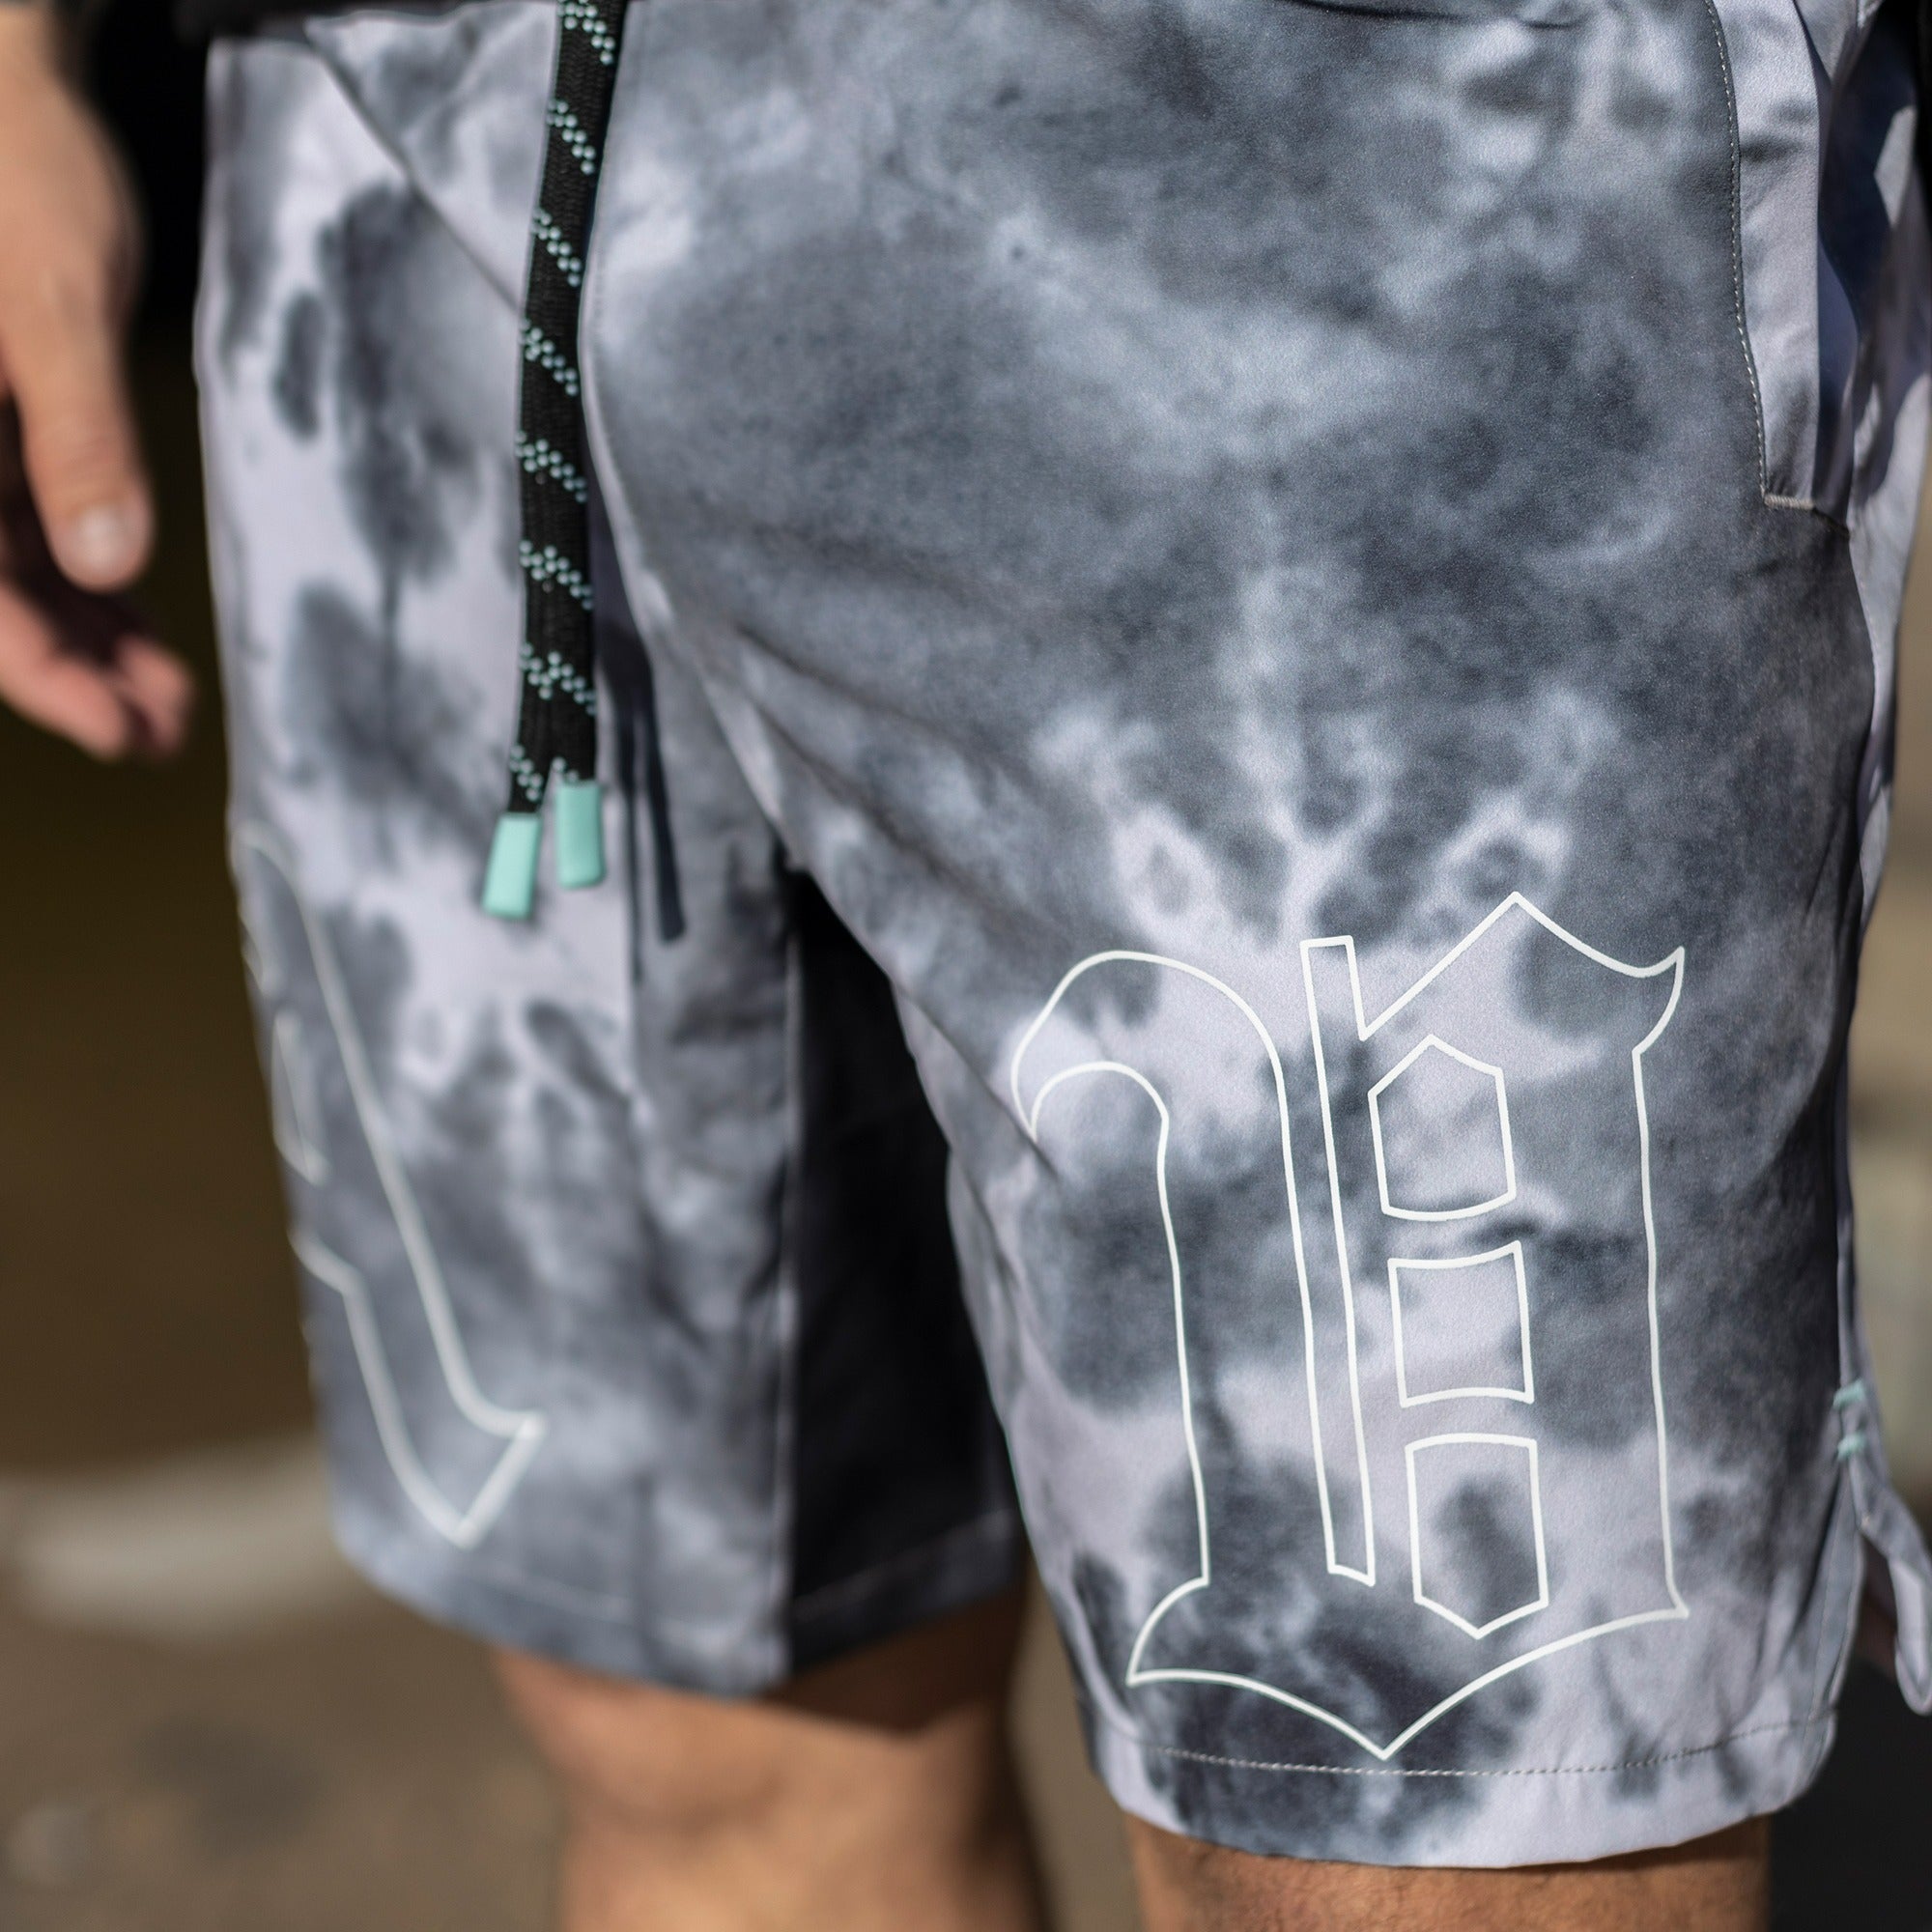 EXTREME FRONT CLOSE UP OF DETAIL PRINT OF SMOKE WATER CLOUD WASH TRAINING SHORTS WORN BY MODEL KEKOA.